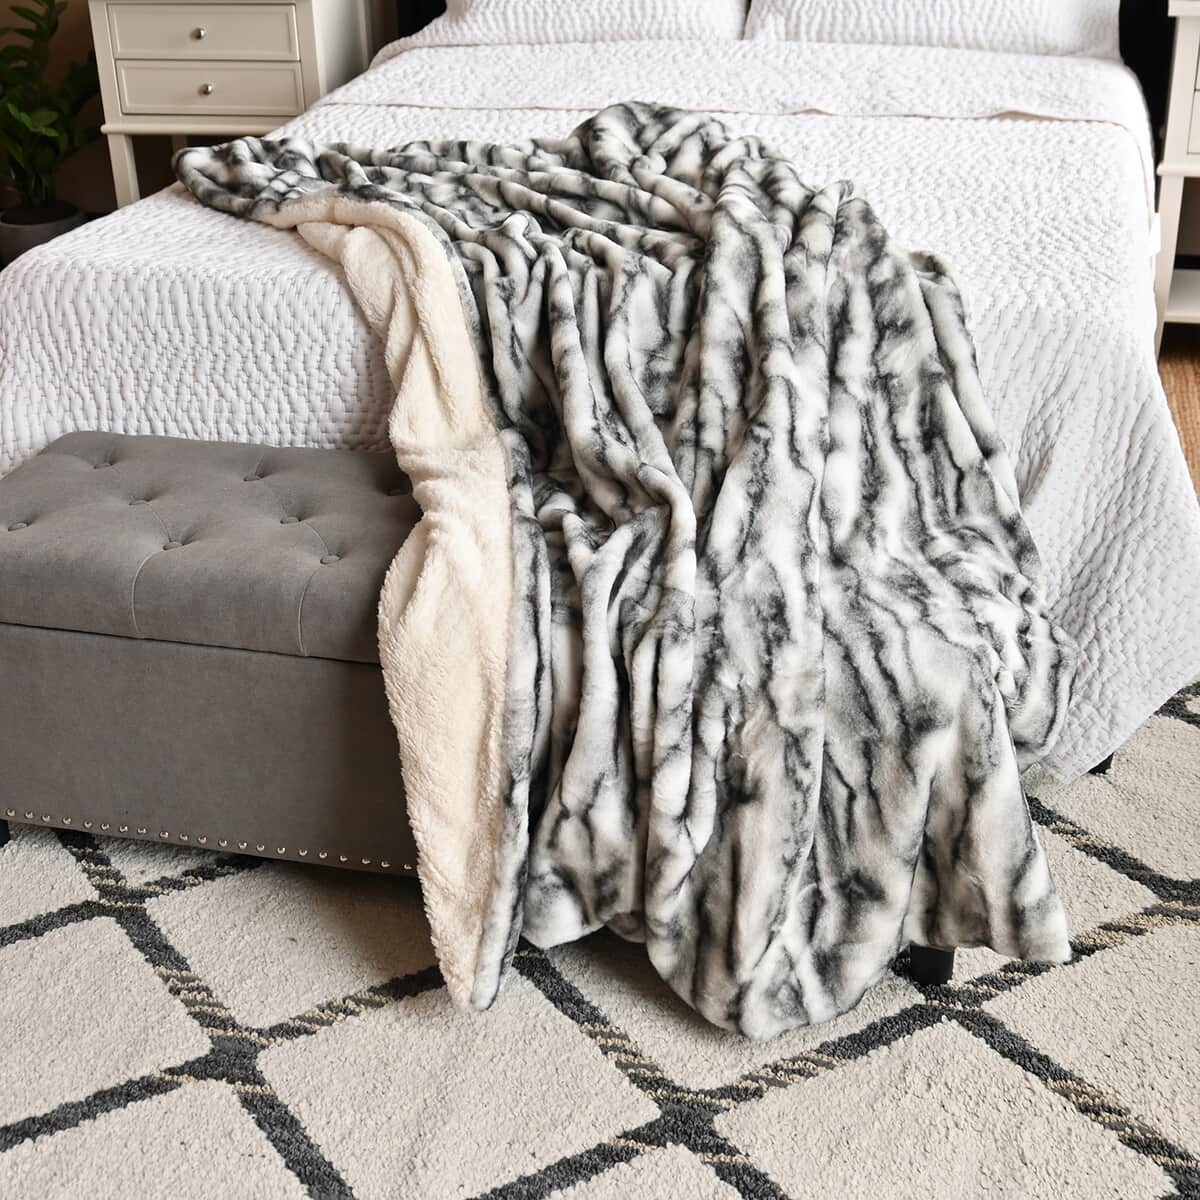 HOMESMART Black and White Cozy Faux Fur Sherpa Blanket (59"x78") image number 0